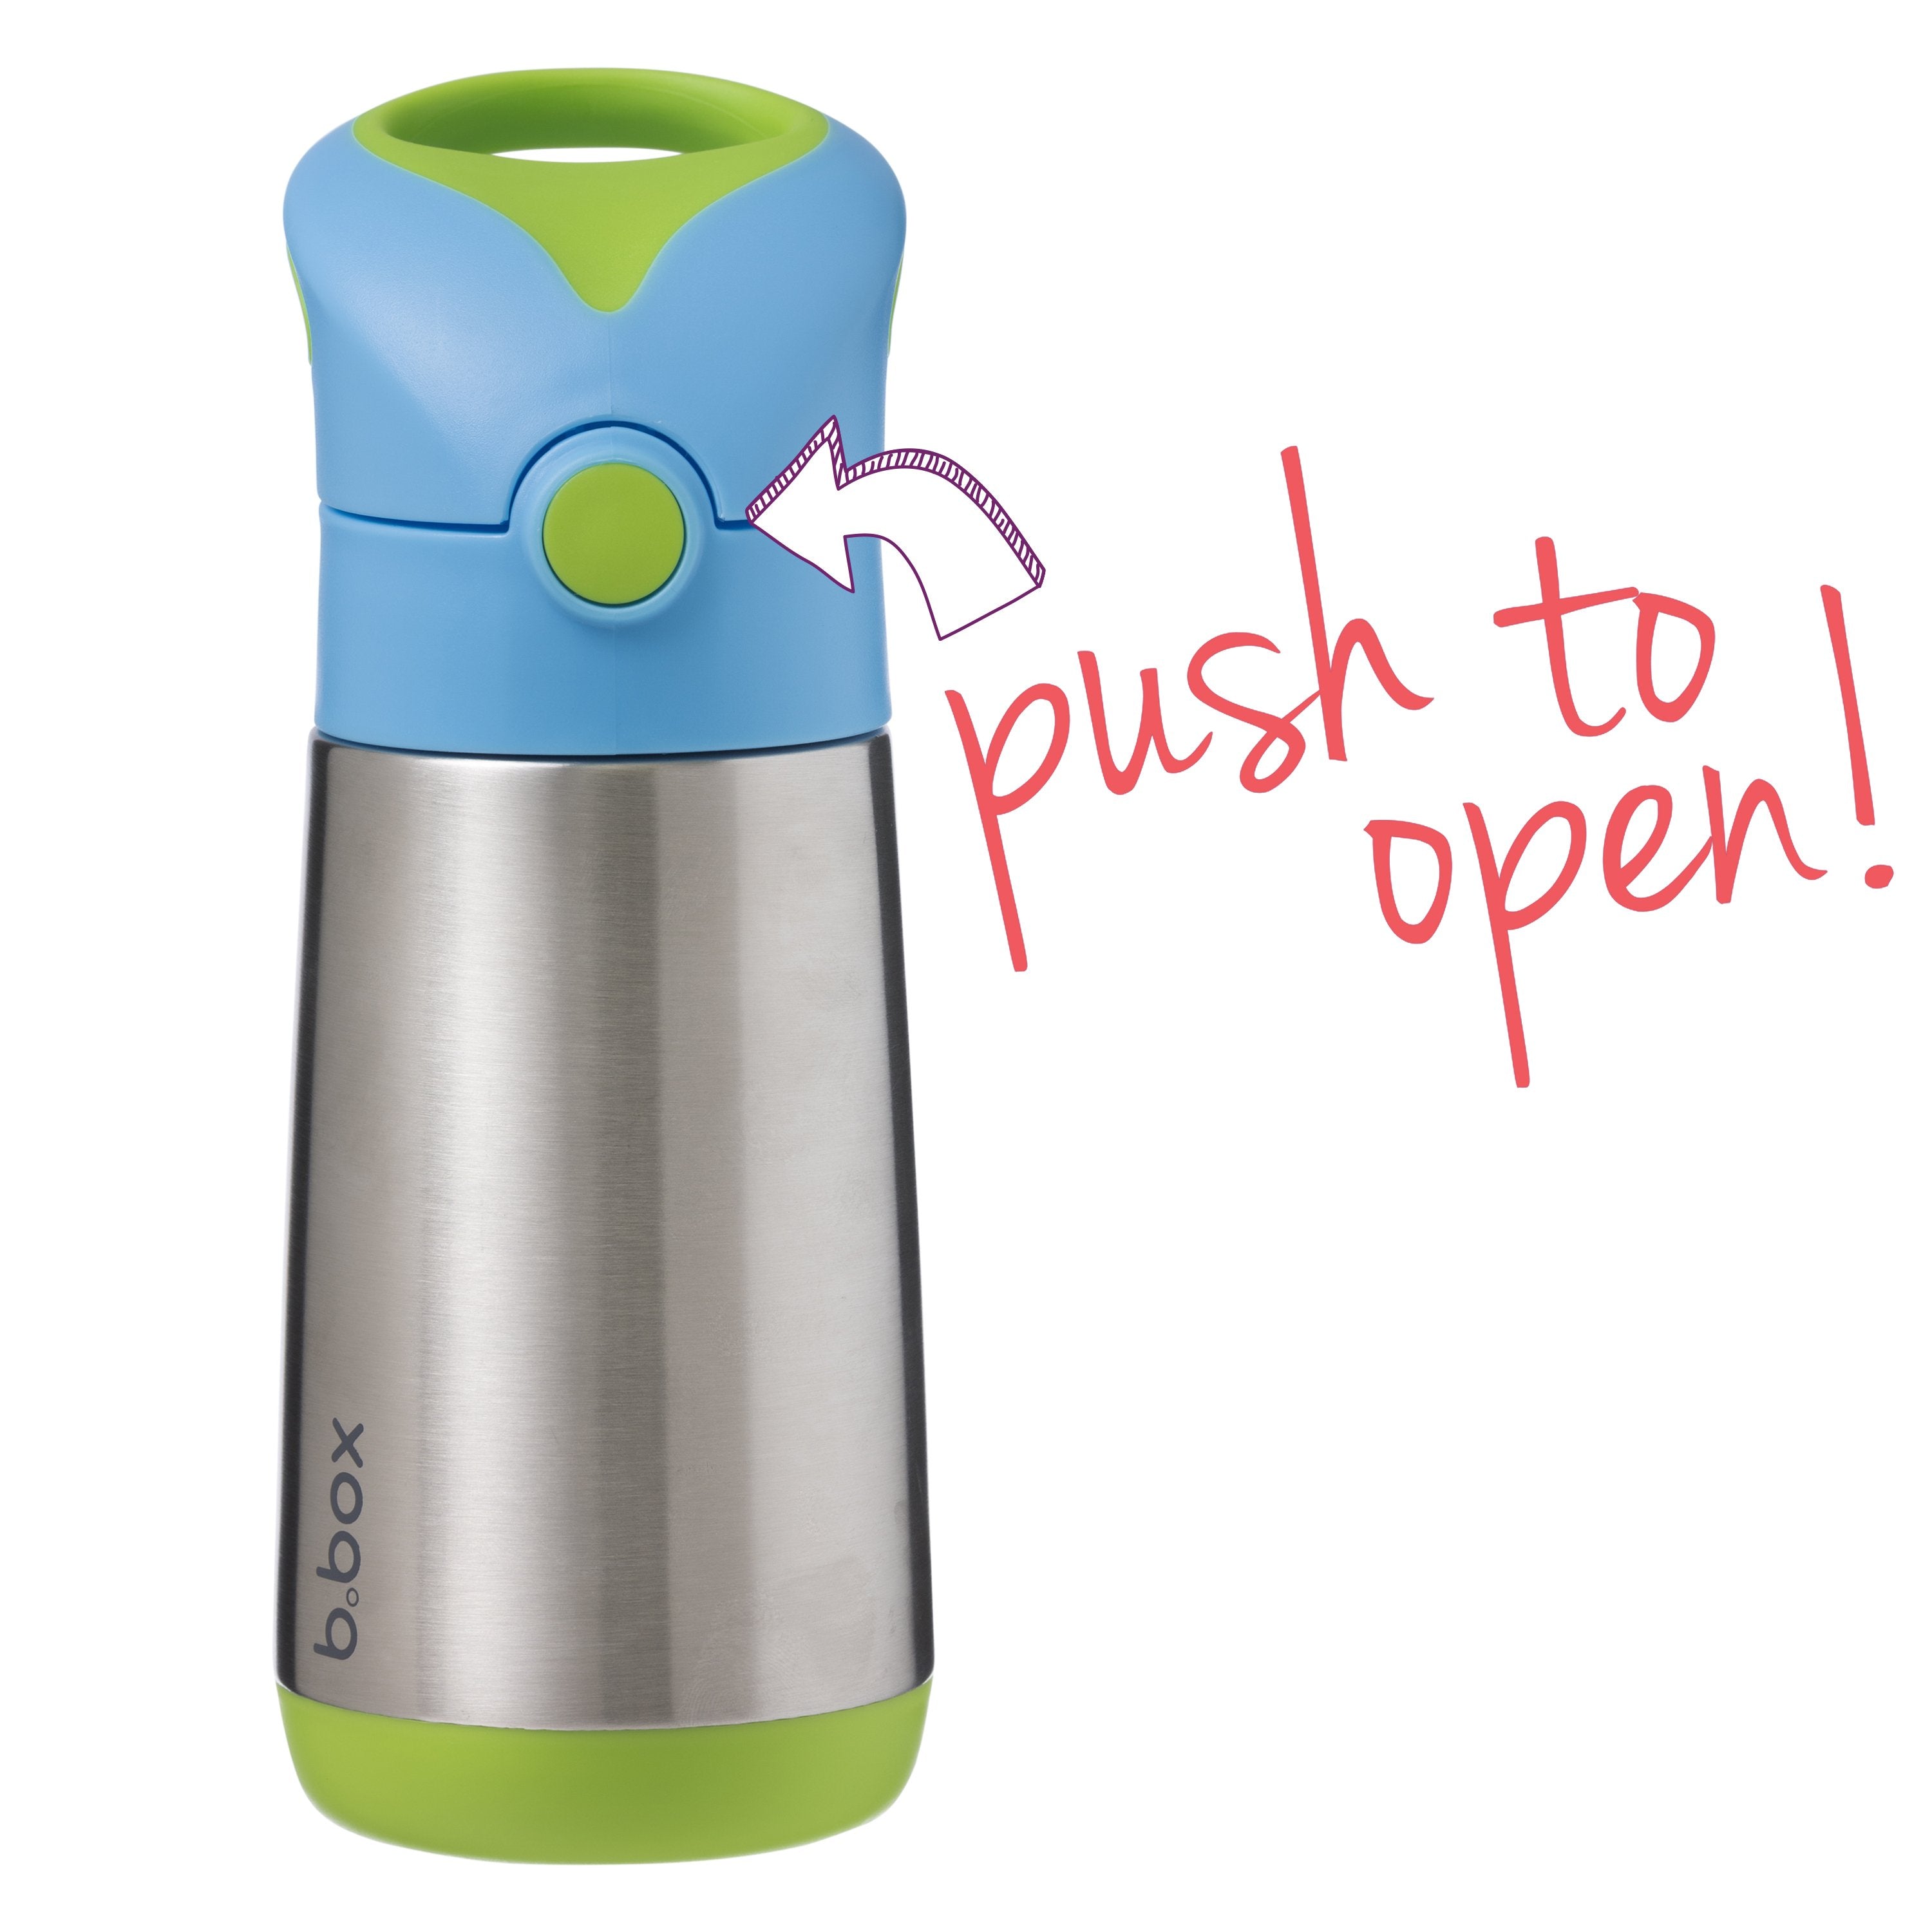 B. Box Insulated Drink Bottle – Queens Baby